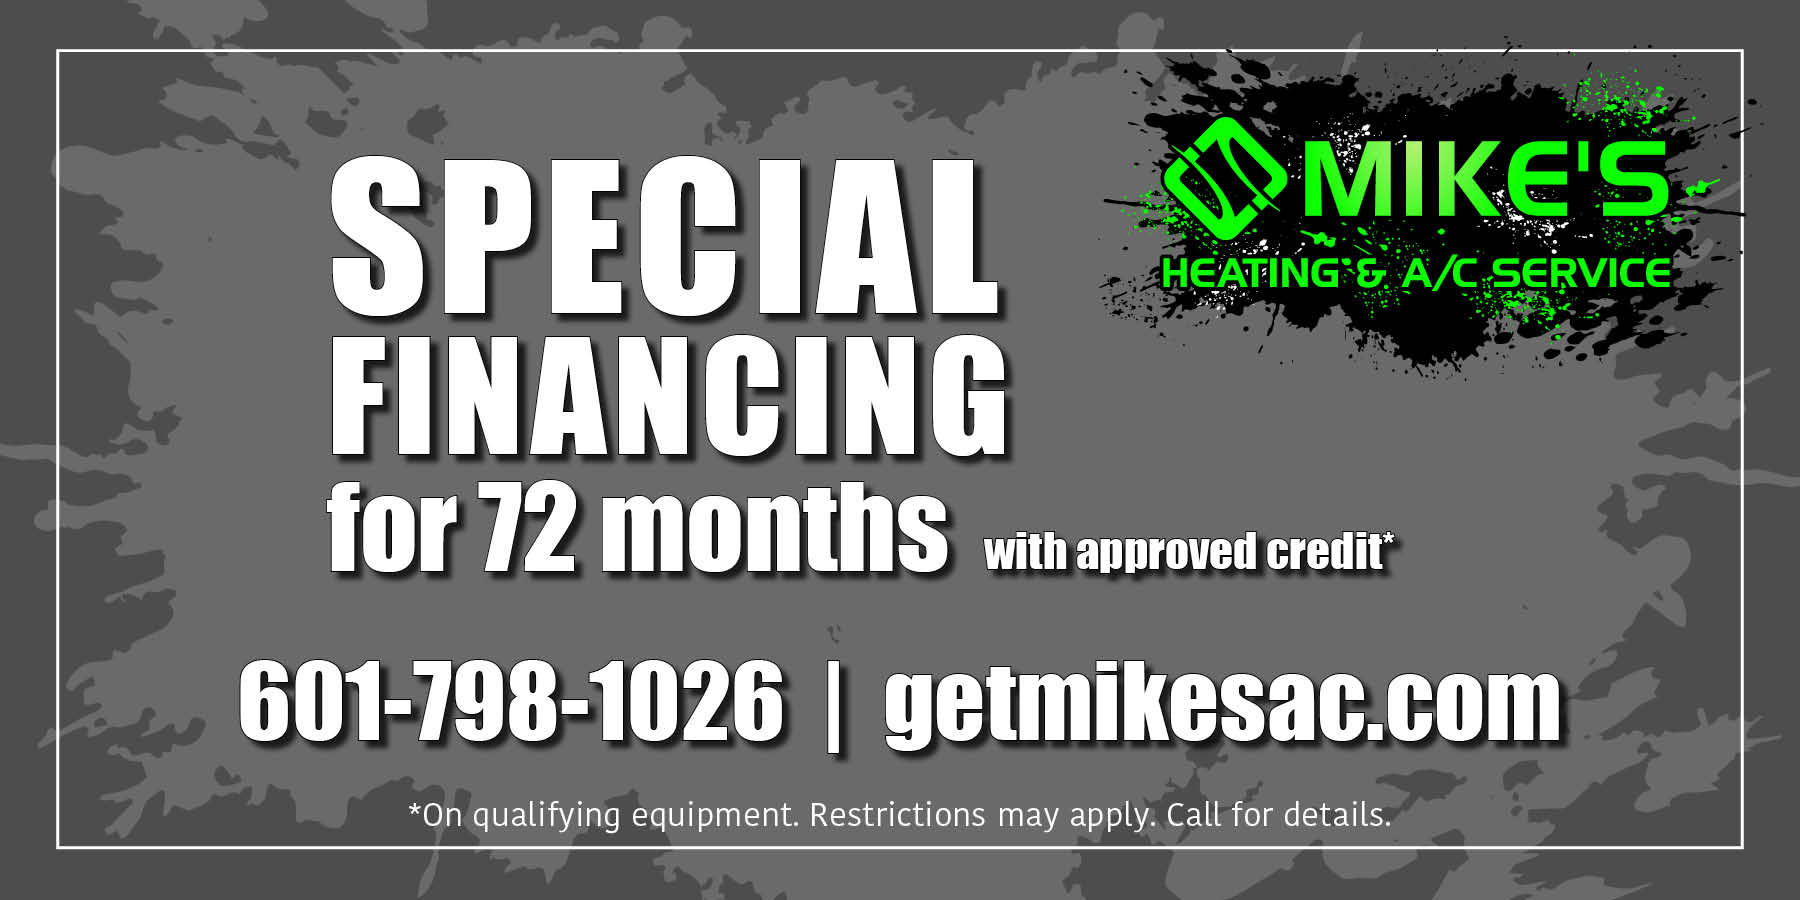 Special financing for 72 months, with approved credit. Only on qualified equipment. Restrictions may apply. Please call for details. Subject to expire without notice.